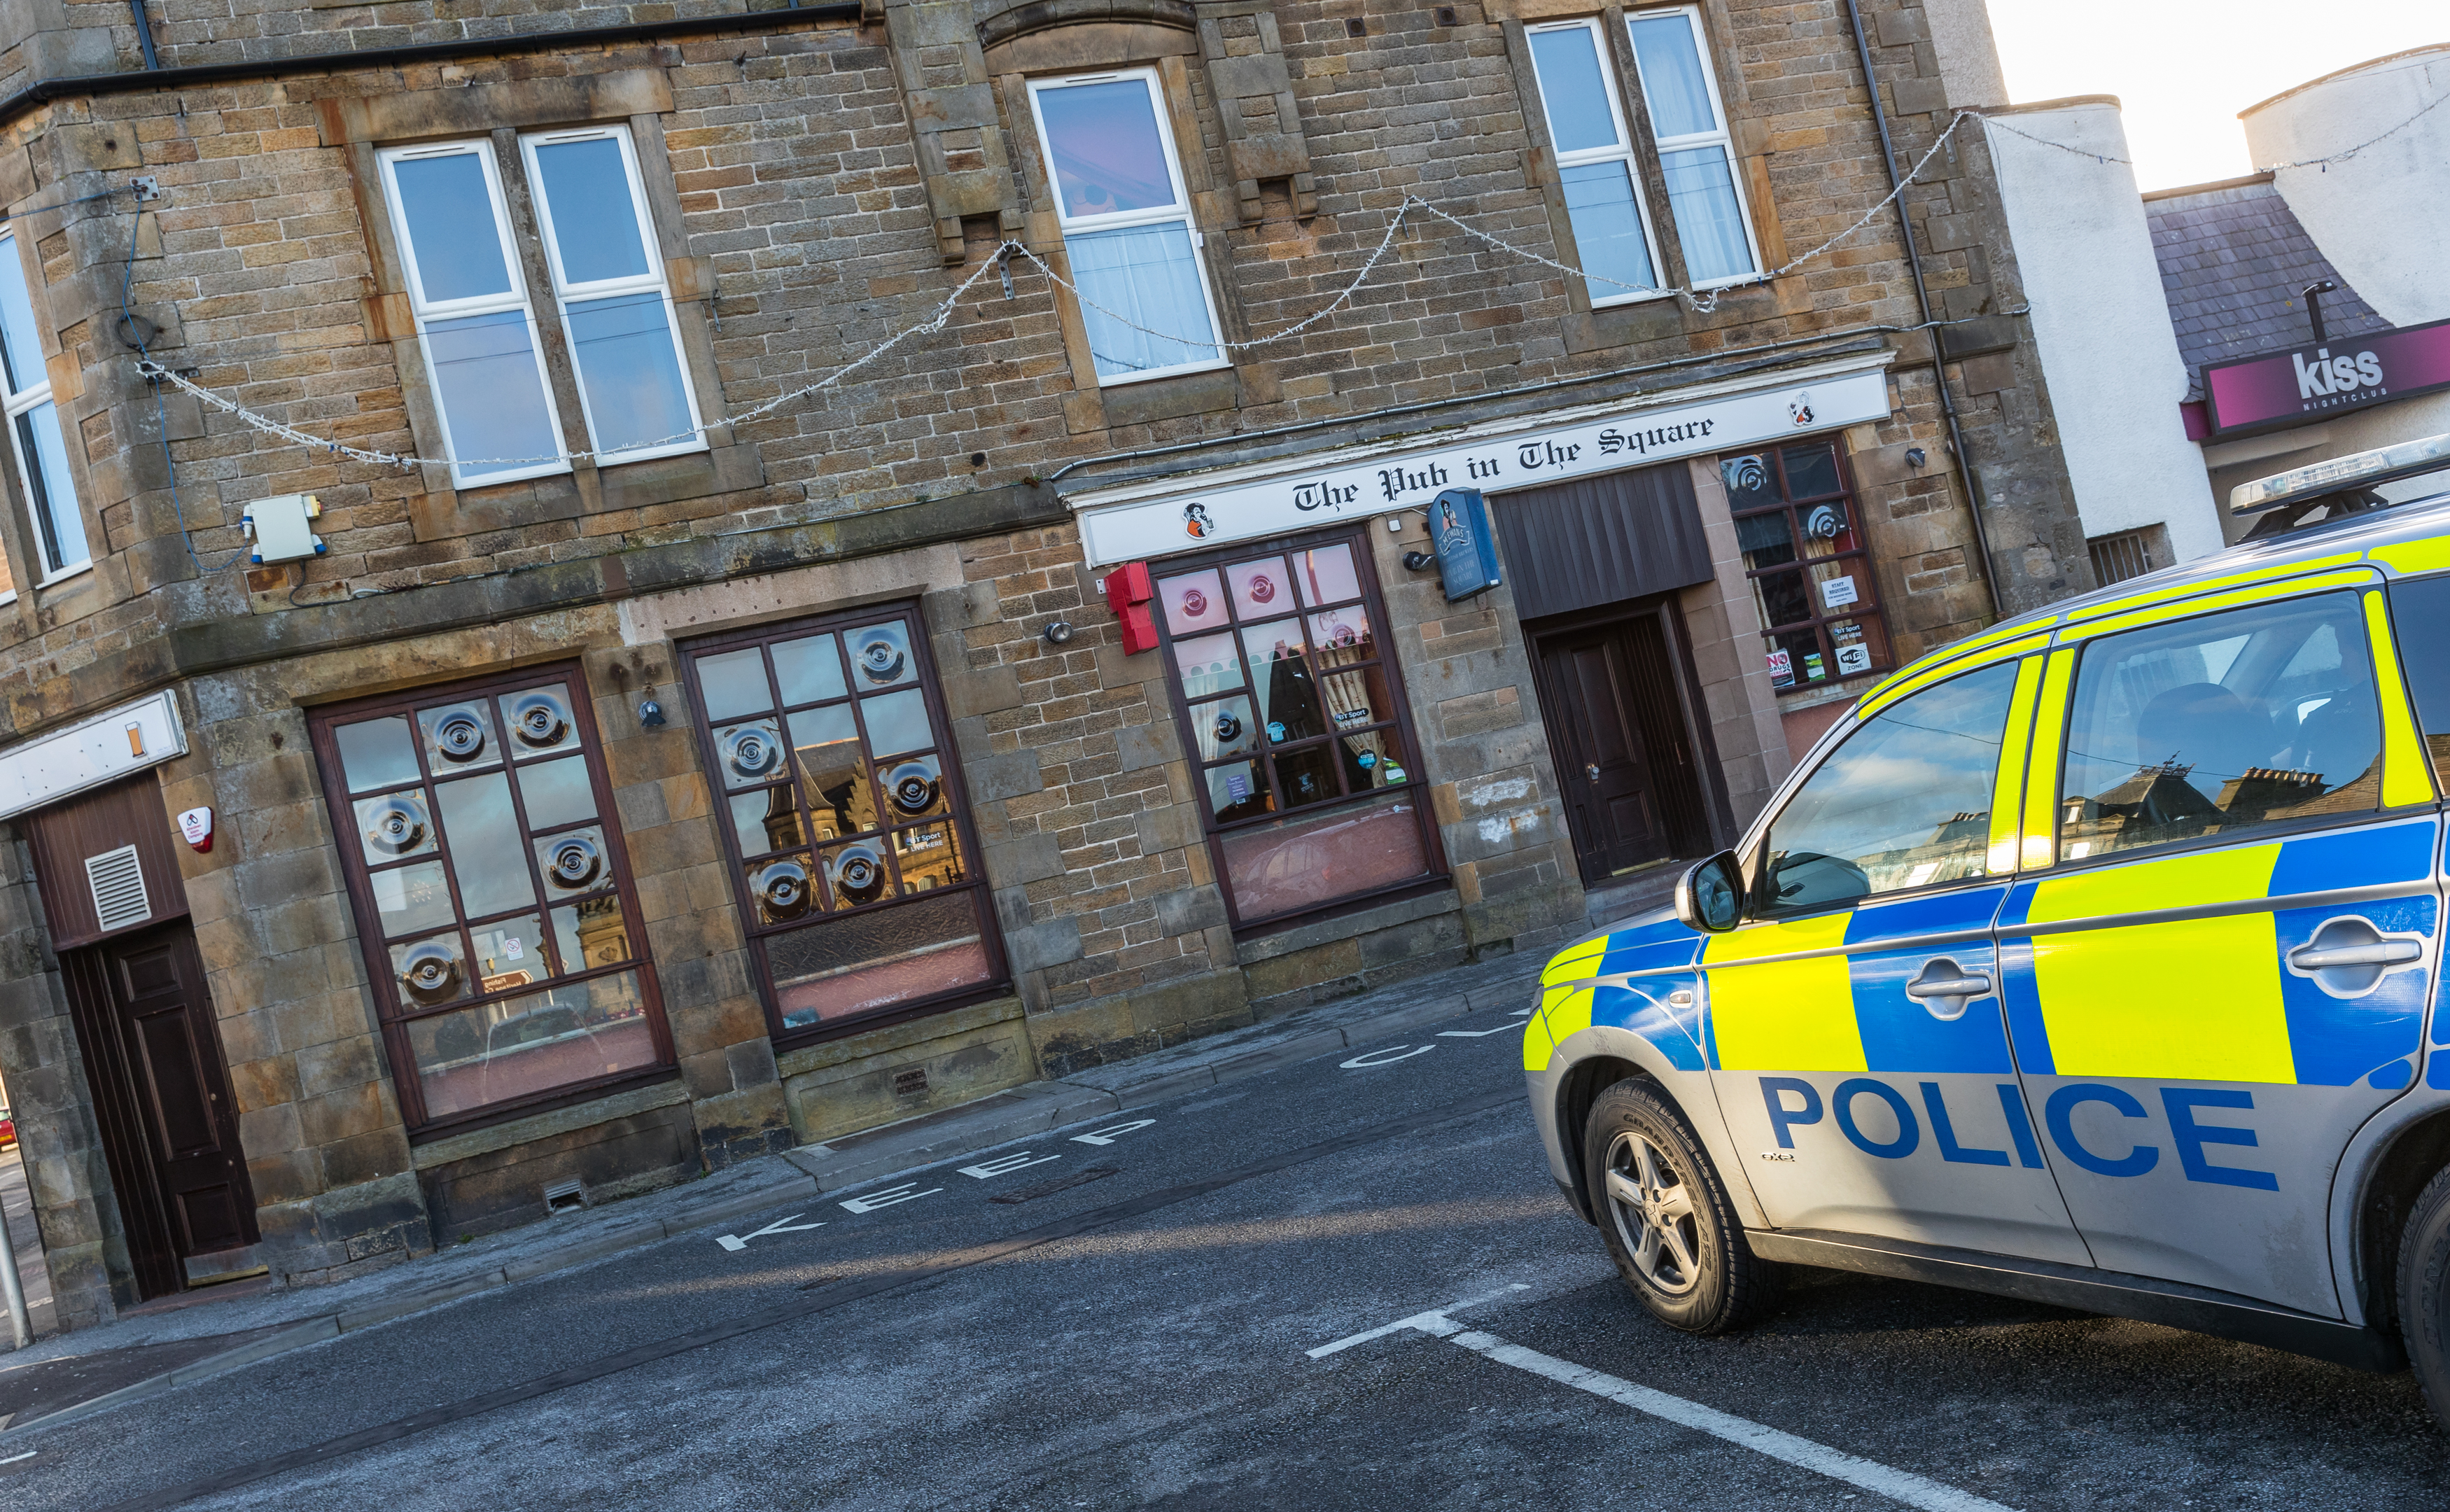 Police sealed off the pub following the incident